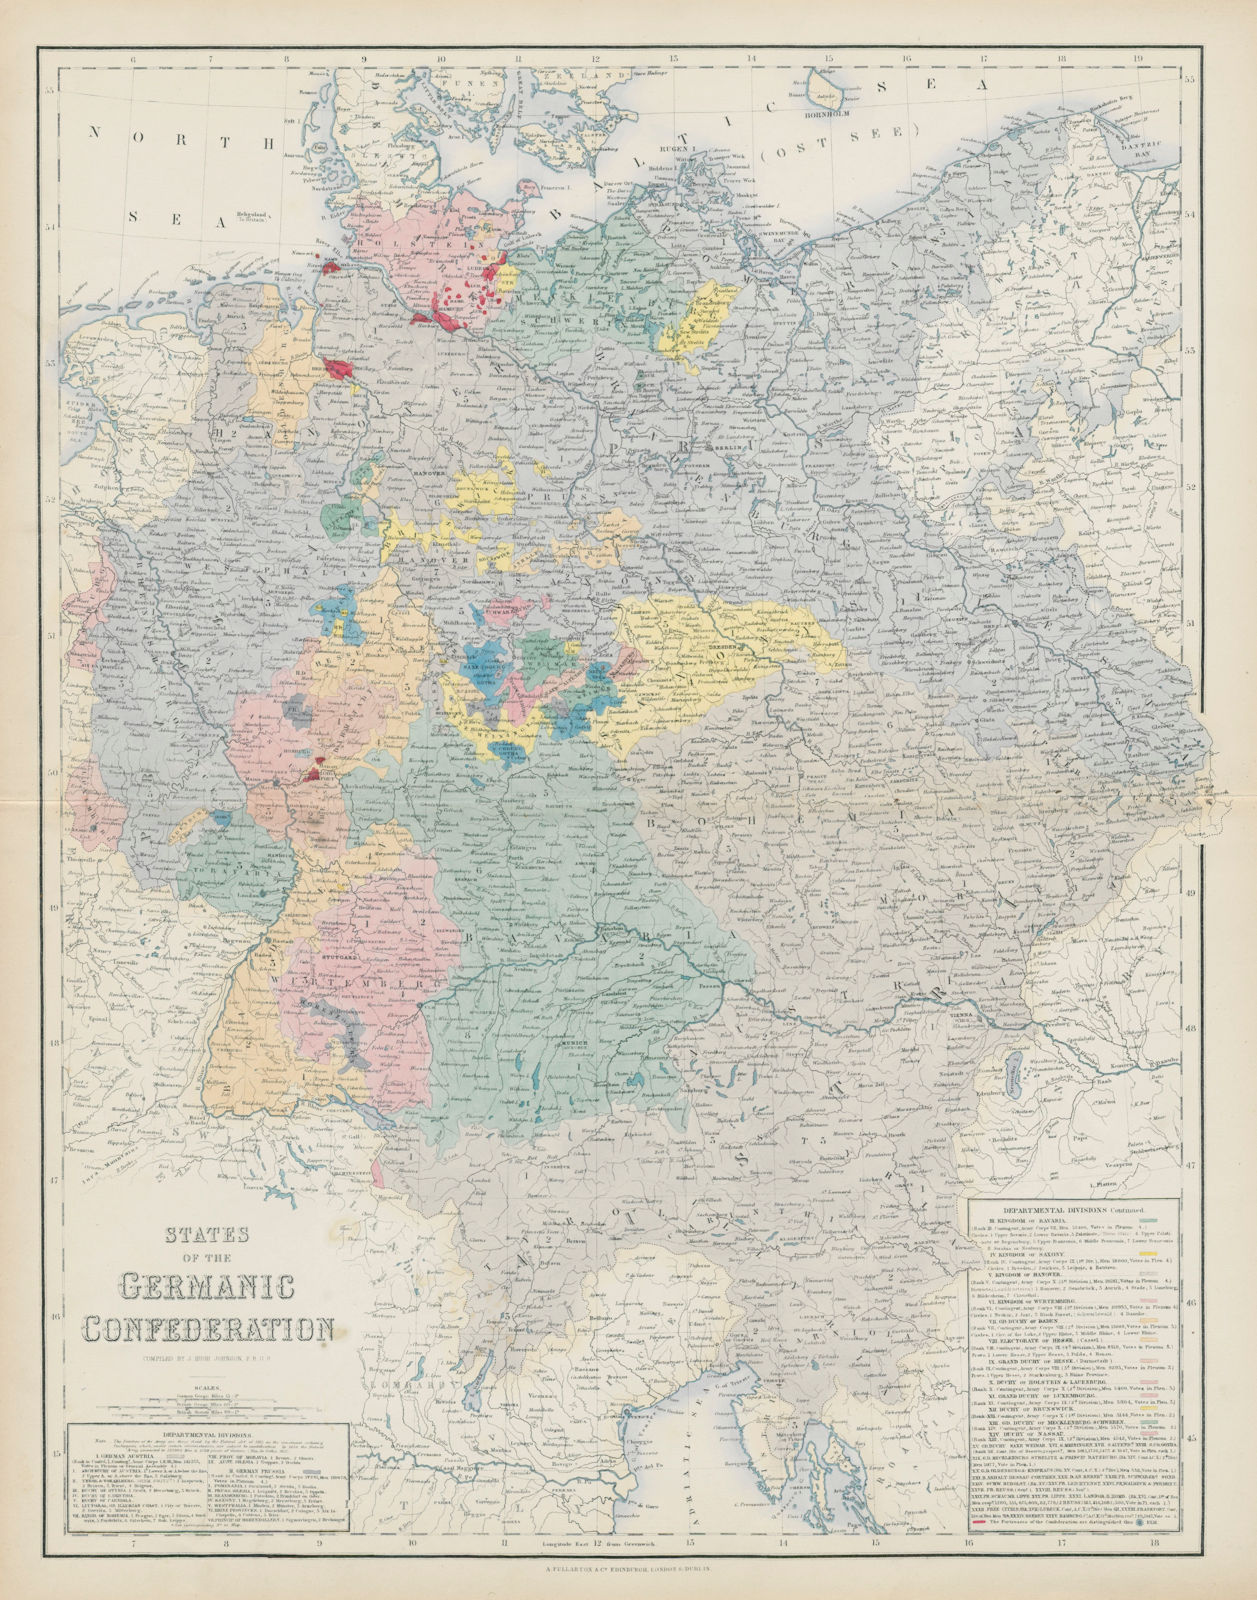 Associate Product States of the Germanic Confederation. Germany Austria Czechia. SWANSTON 1860 map